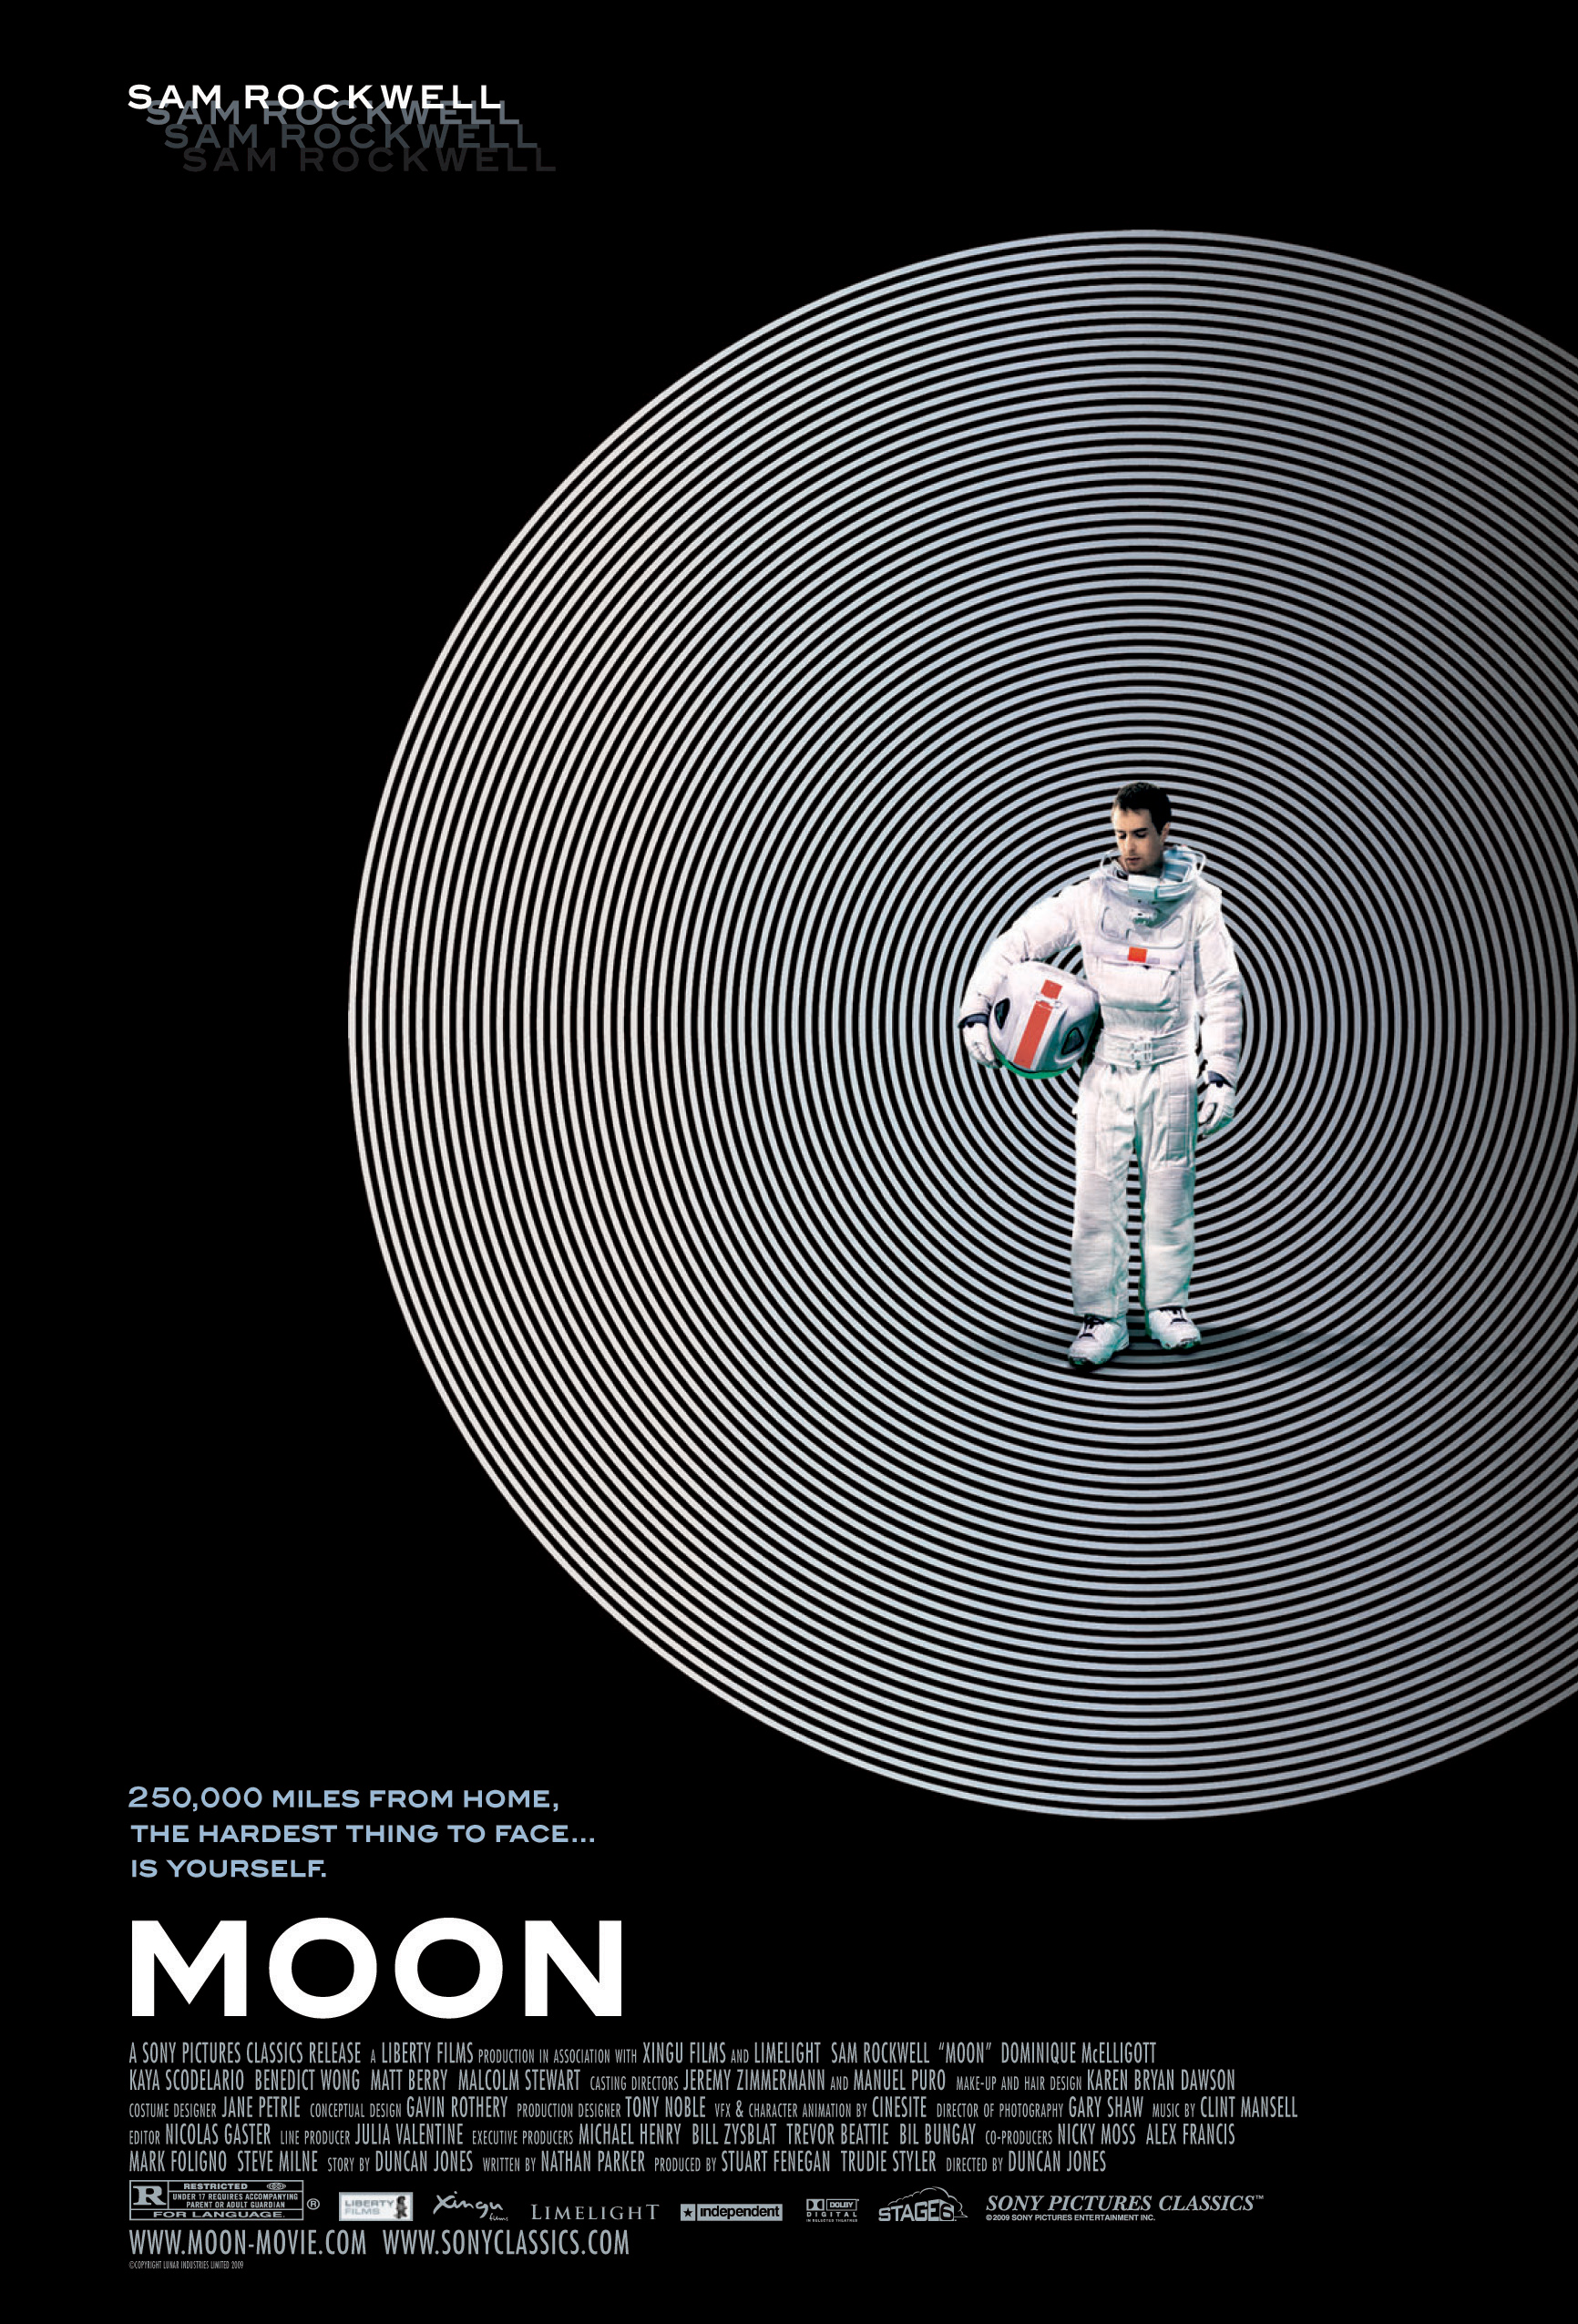 MOON Posters Available NOW!